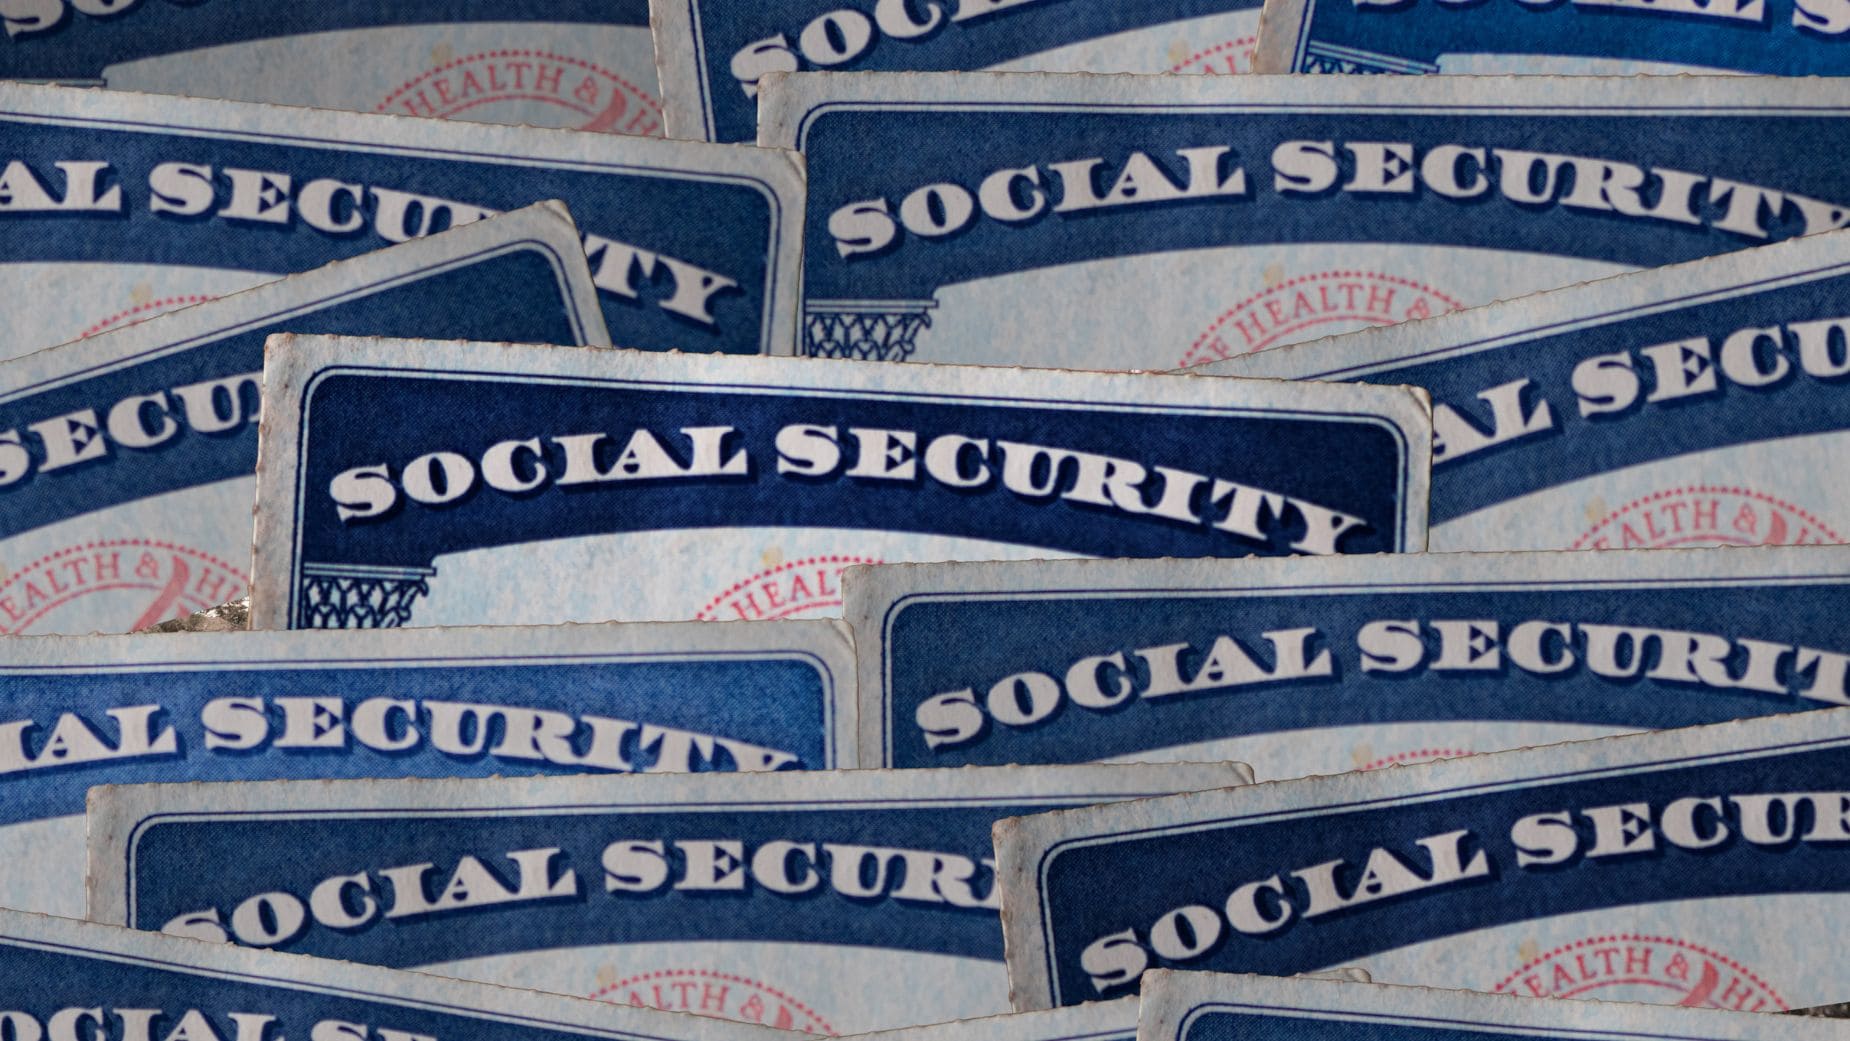 Social Security is sending new checks in days